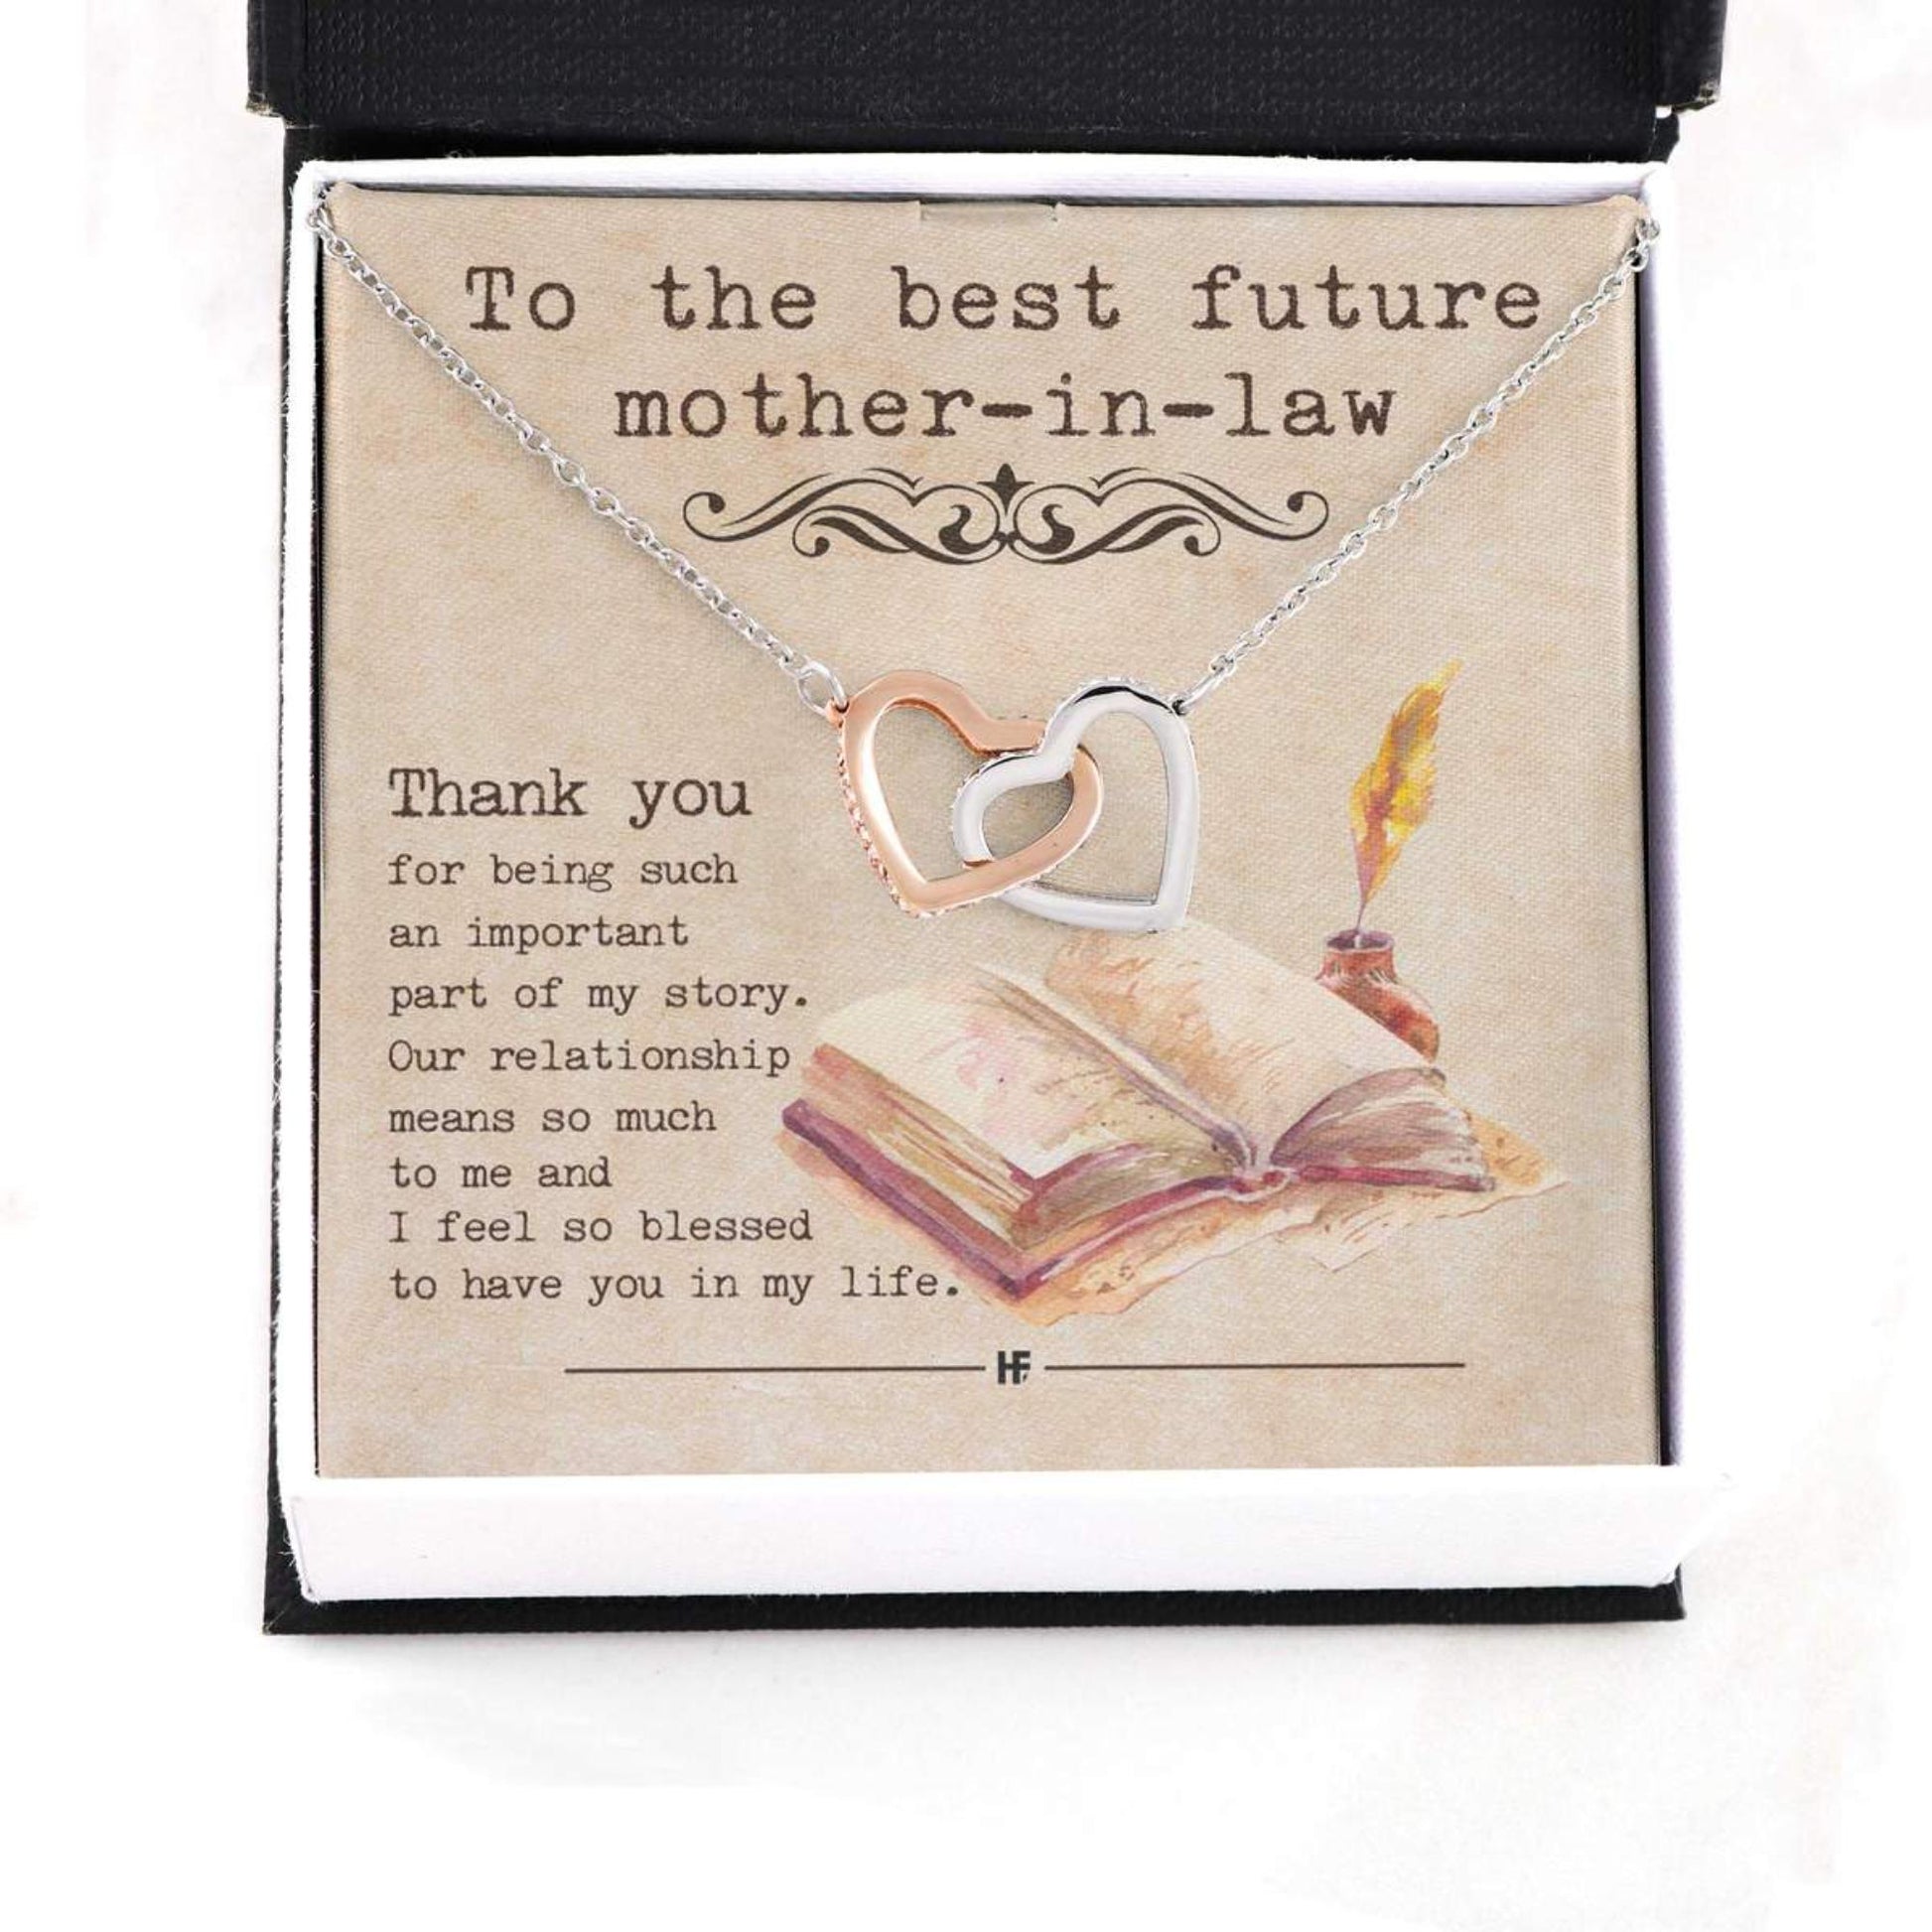 Mother-in-law Necklace, Life Story Daughter's Gift Future Mother In Law Necklace